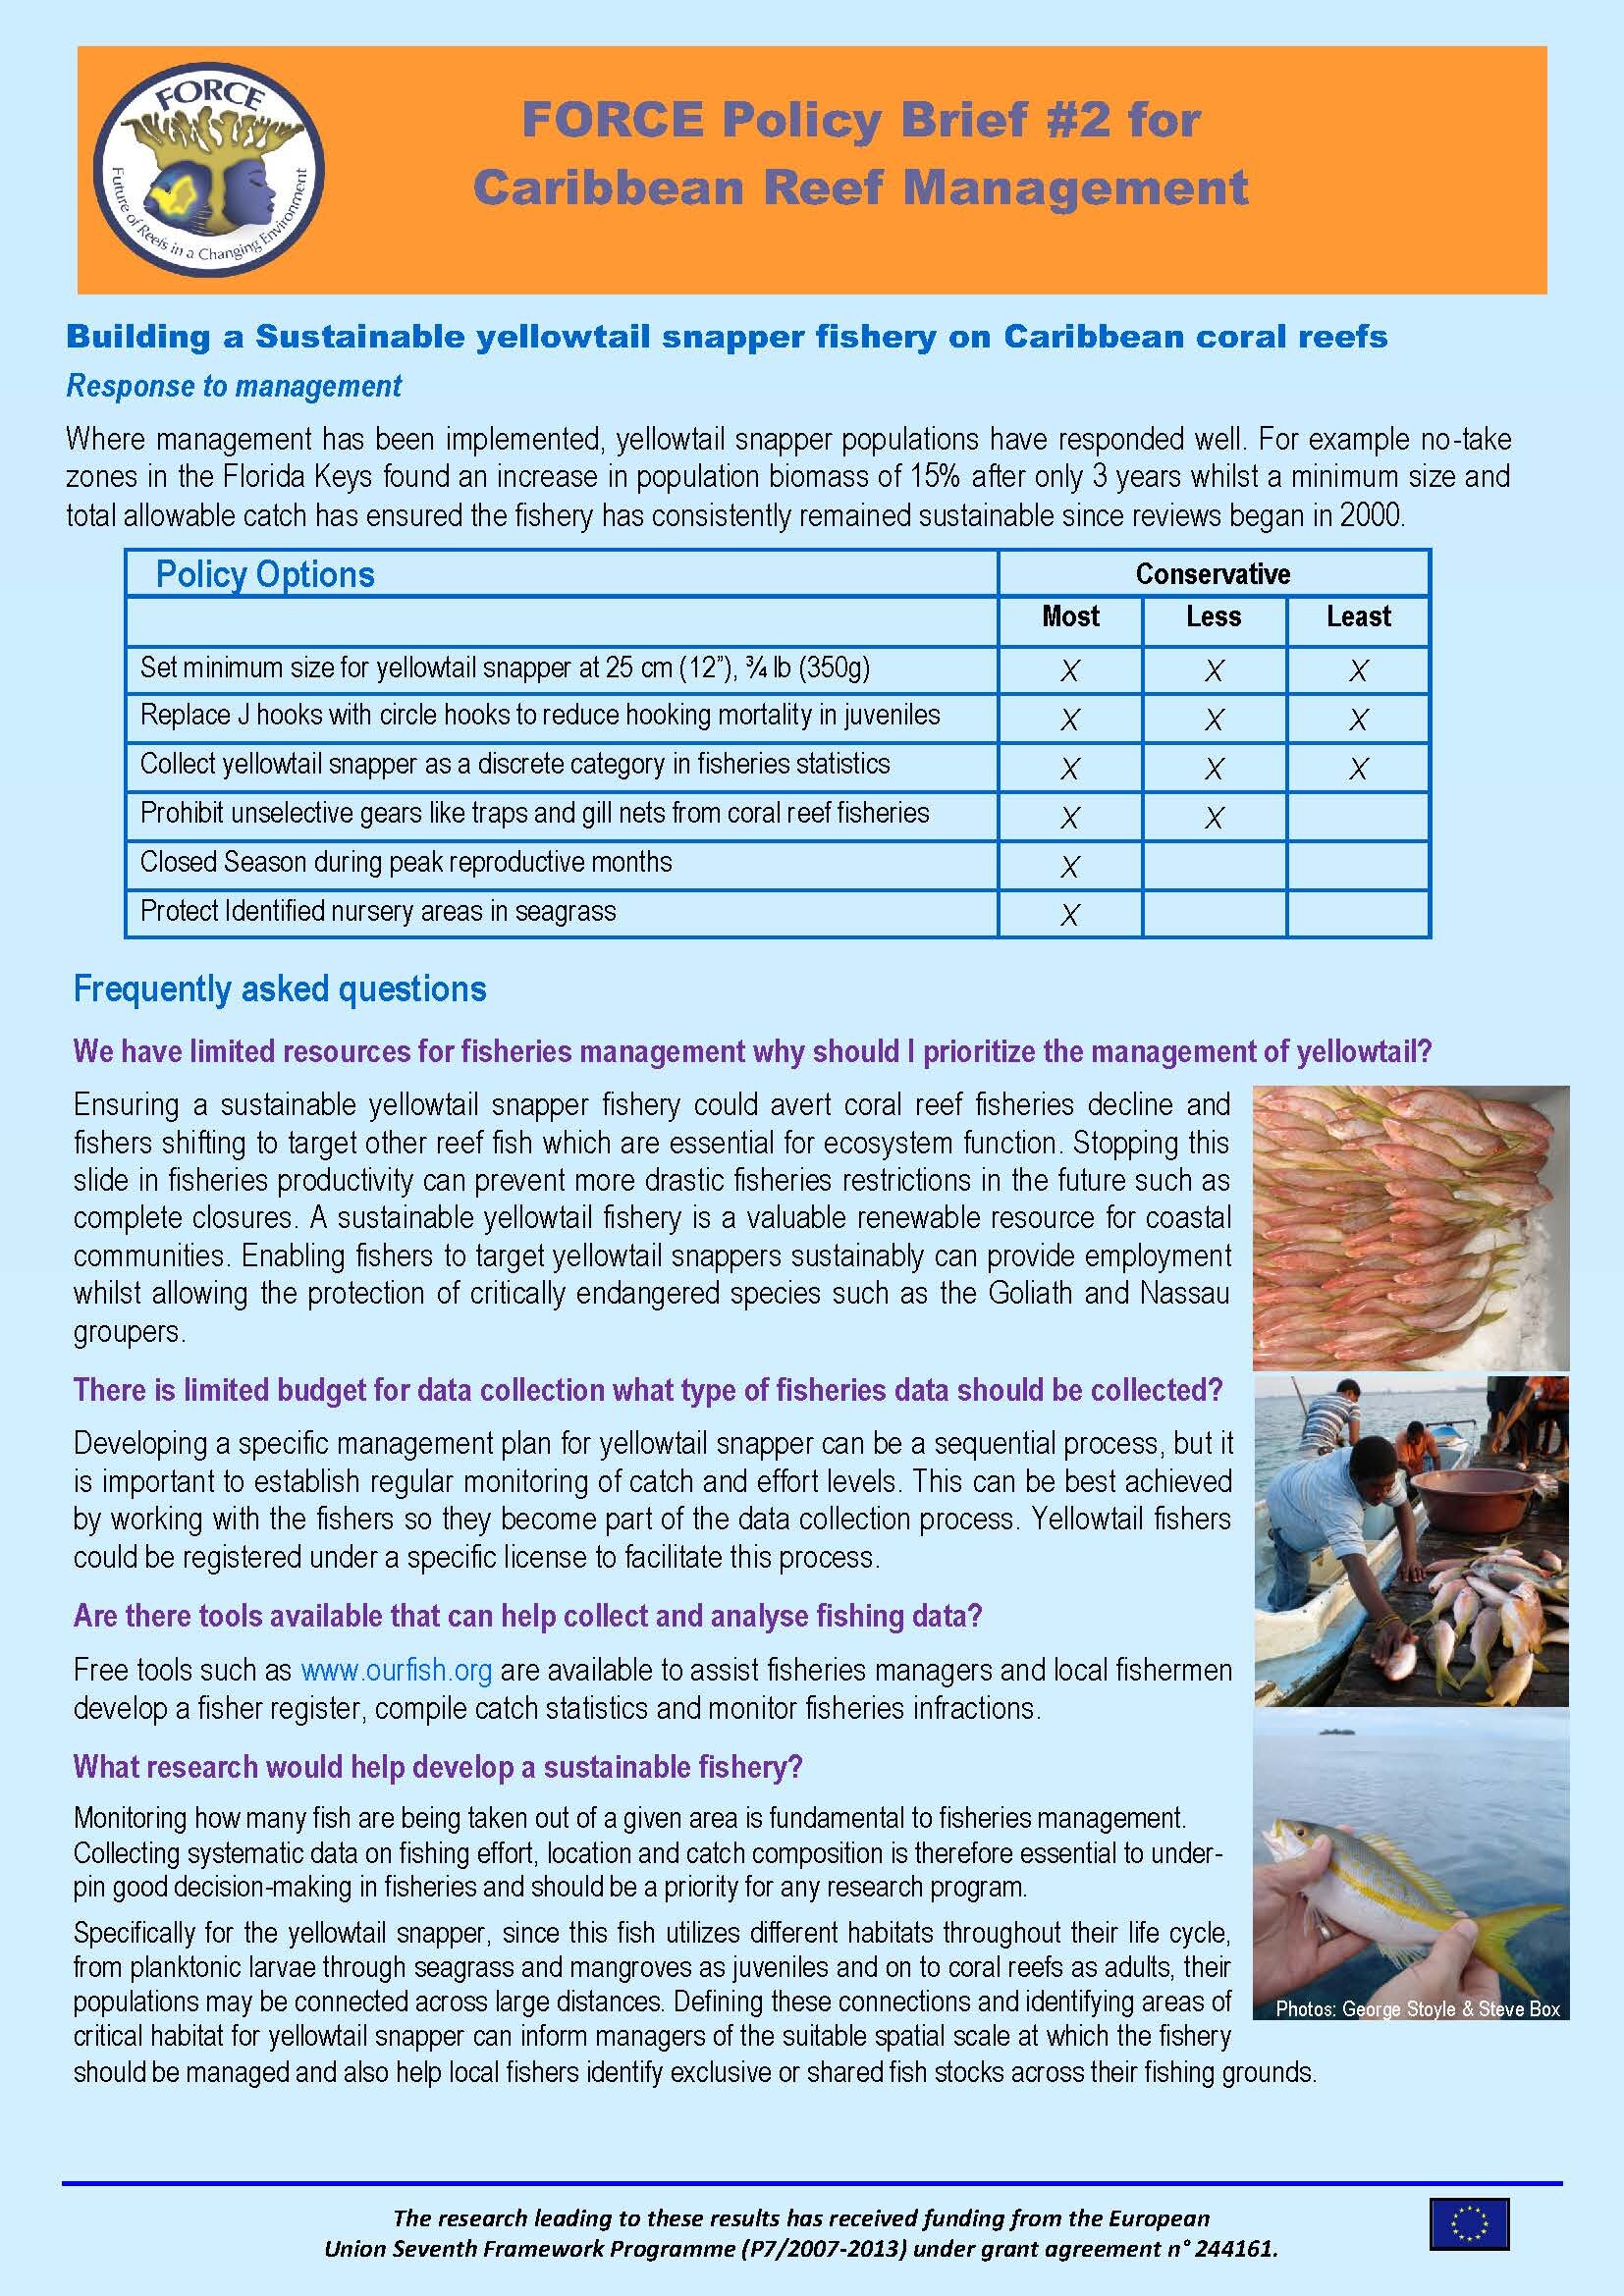 FORCE Policy brief 2_Sustainable Yellowtail Snapper fishery_Pg_2.jpg